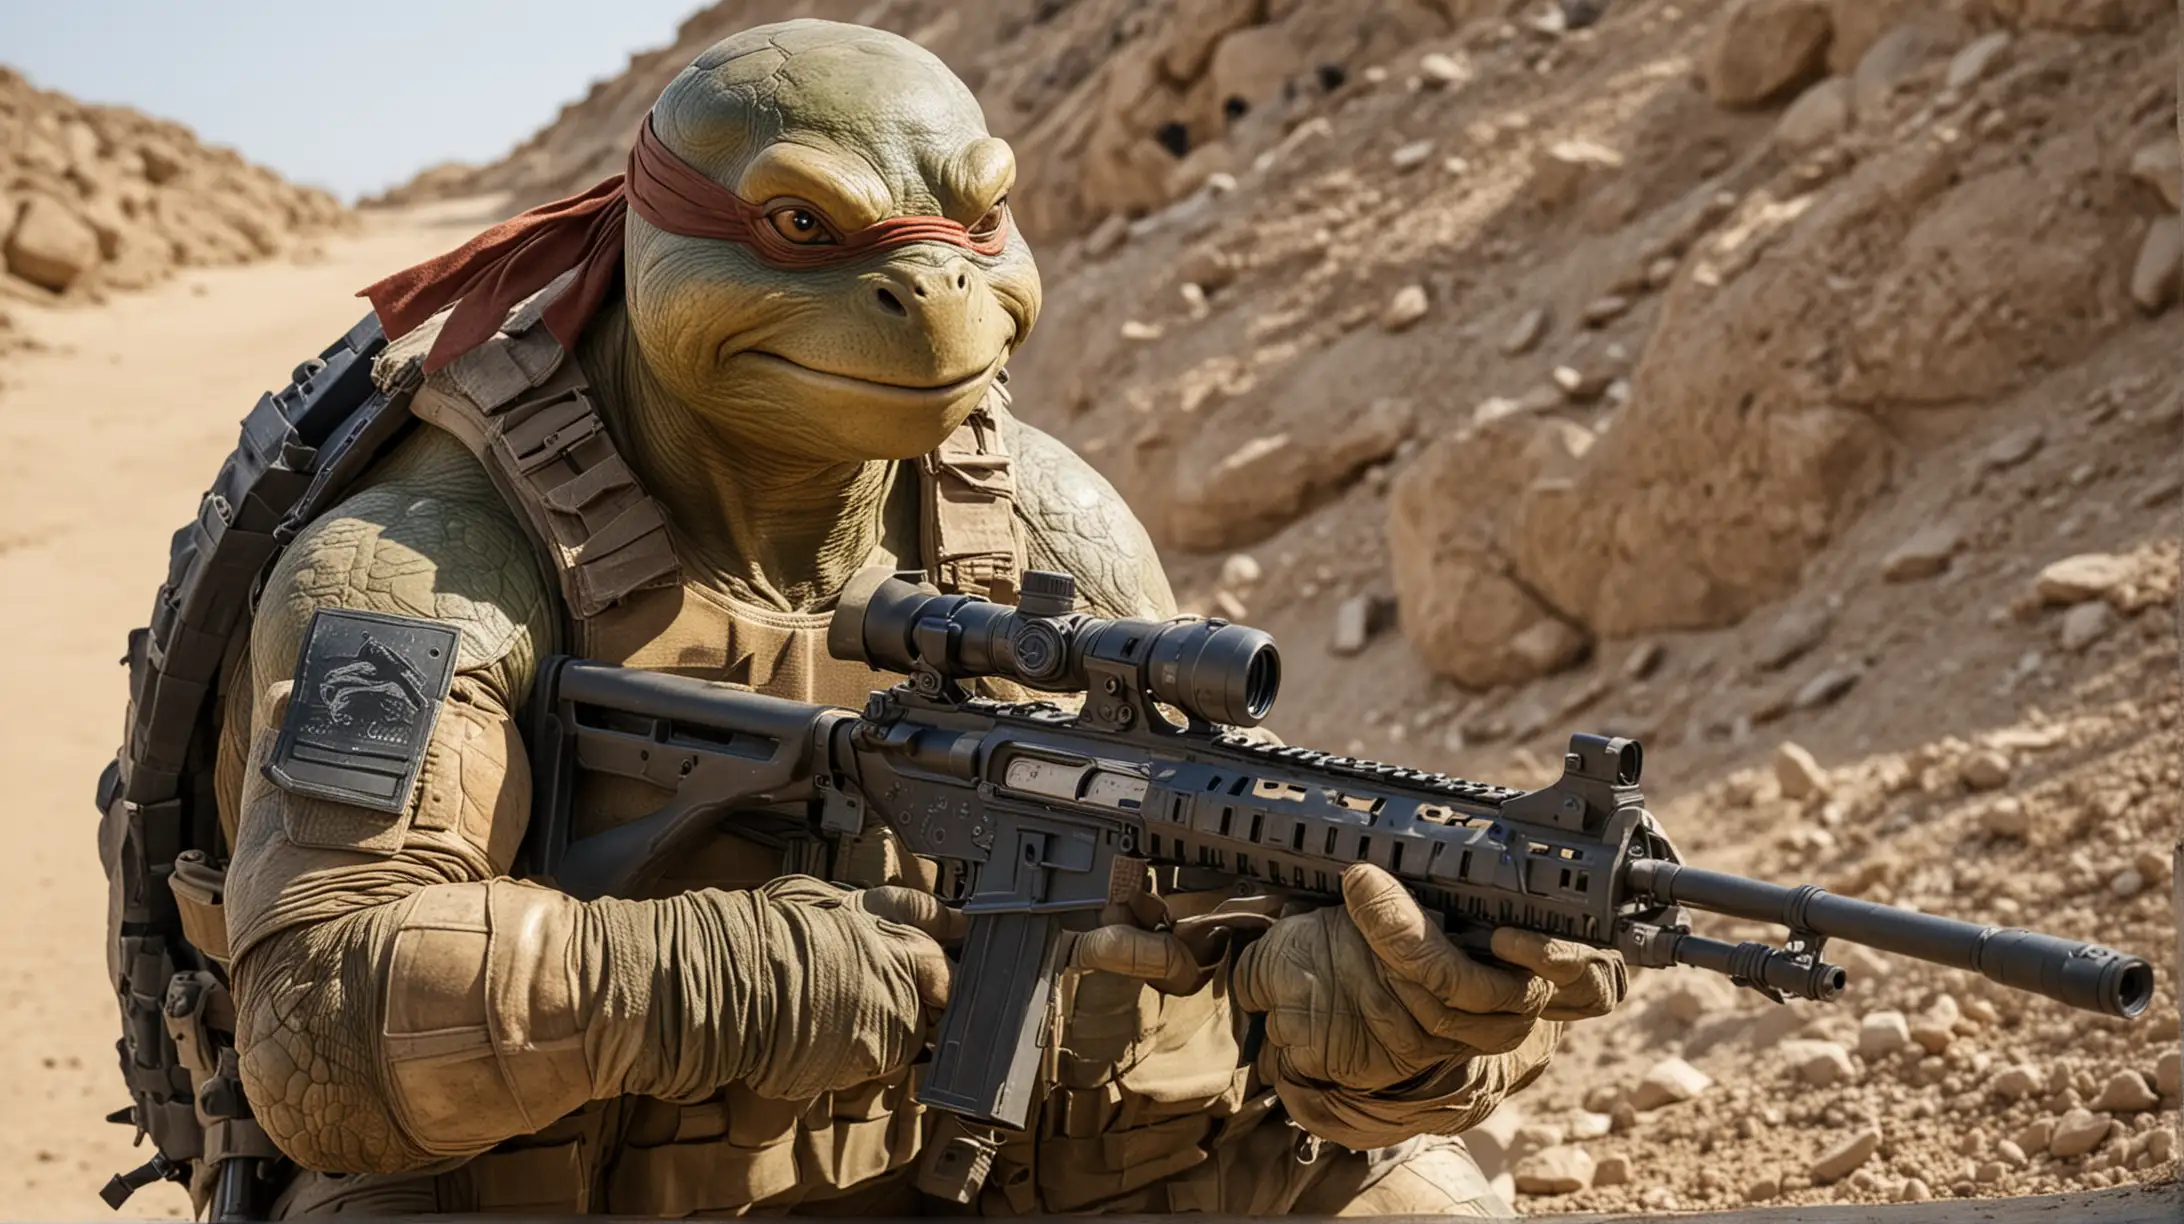 Leonardo the ninja turtle has joined the navy seals as a sniper, on deployment in Afghanistan